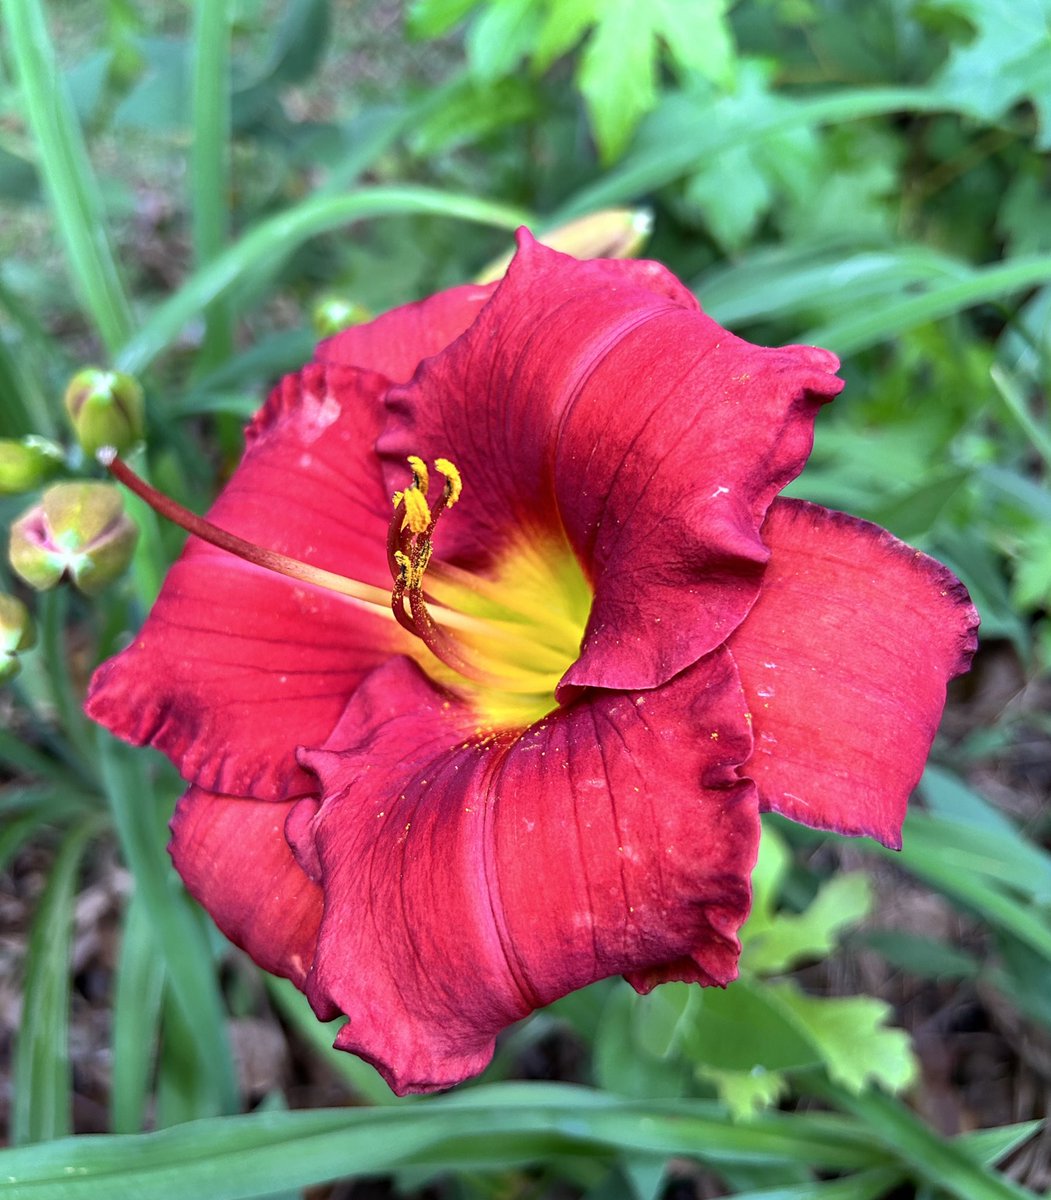 #FlowersOnFriday is this sizzling hot fire engine red #Hemerocallis in #mygarden this is a reliable rebloomer and holds that color without fading ❤️‍🔥😃

#DailyBotanicalBeauty #Daylily #flowerphotography  #Gardening #RedFlowers  #GardeningTwitter #TodaysFlowers